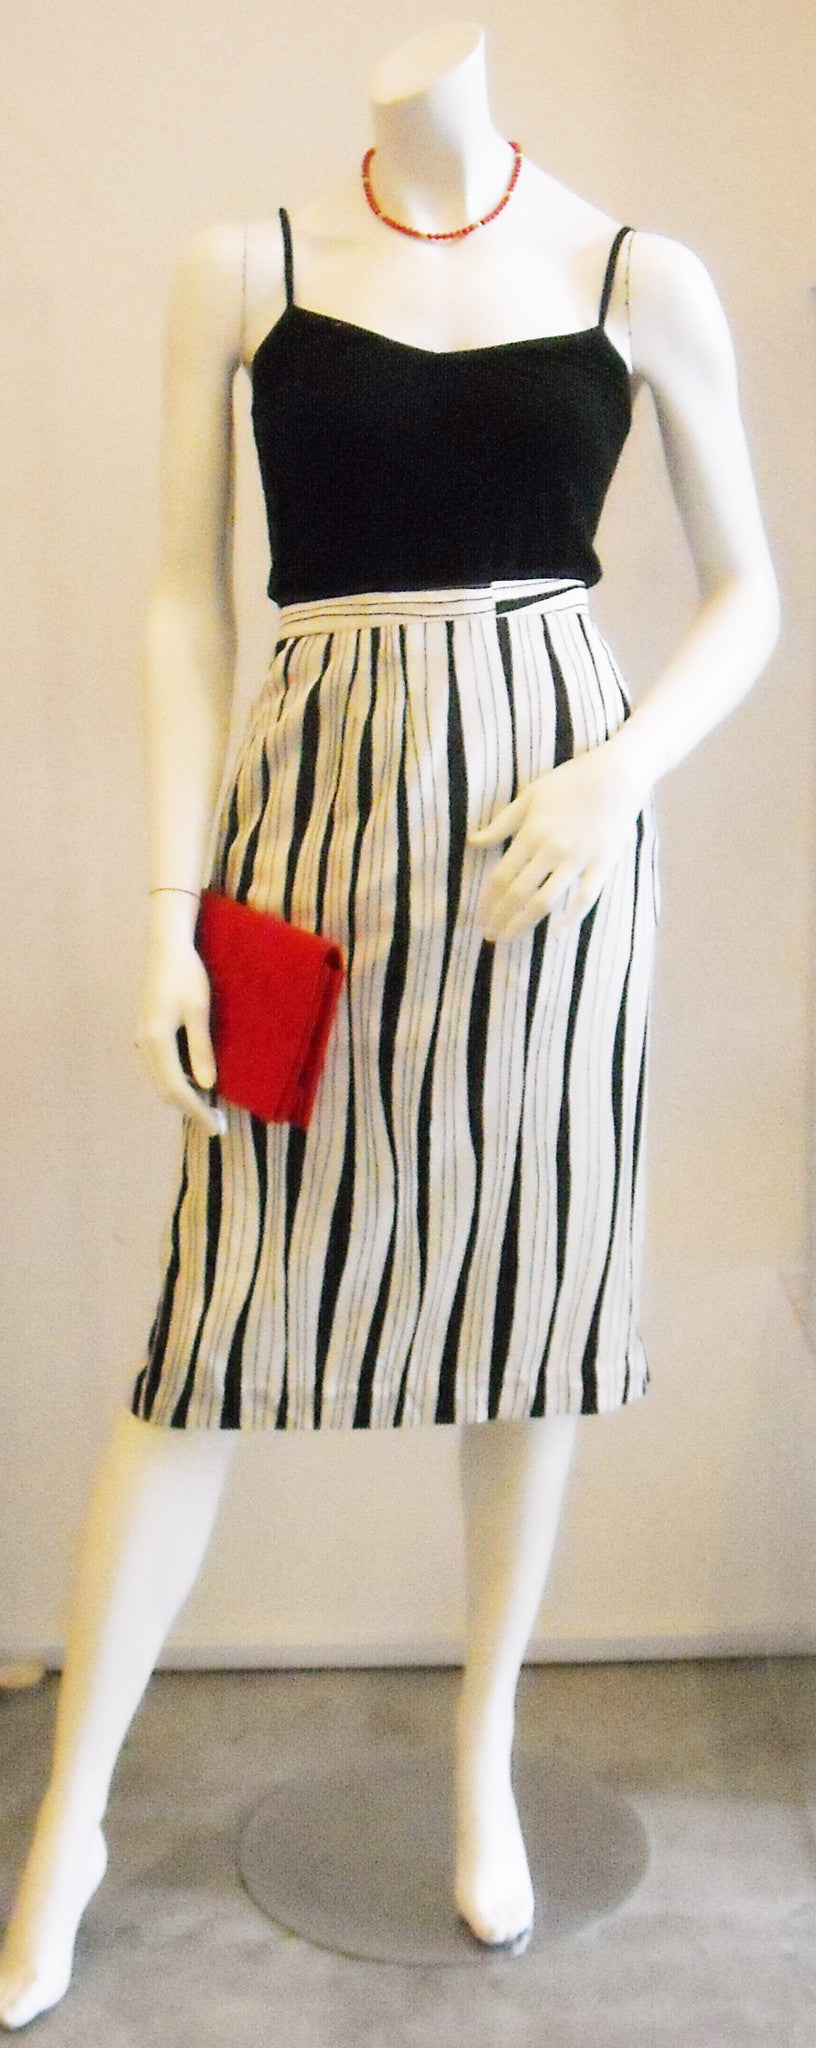 Go with the Flow Black/ White Striped Vintage Skirt